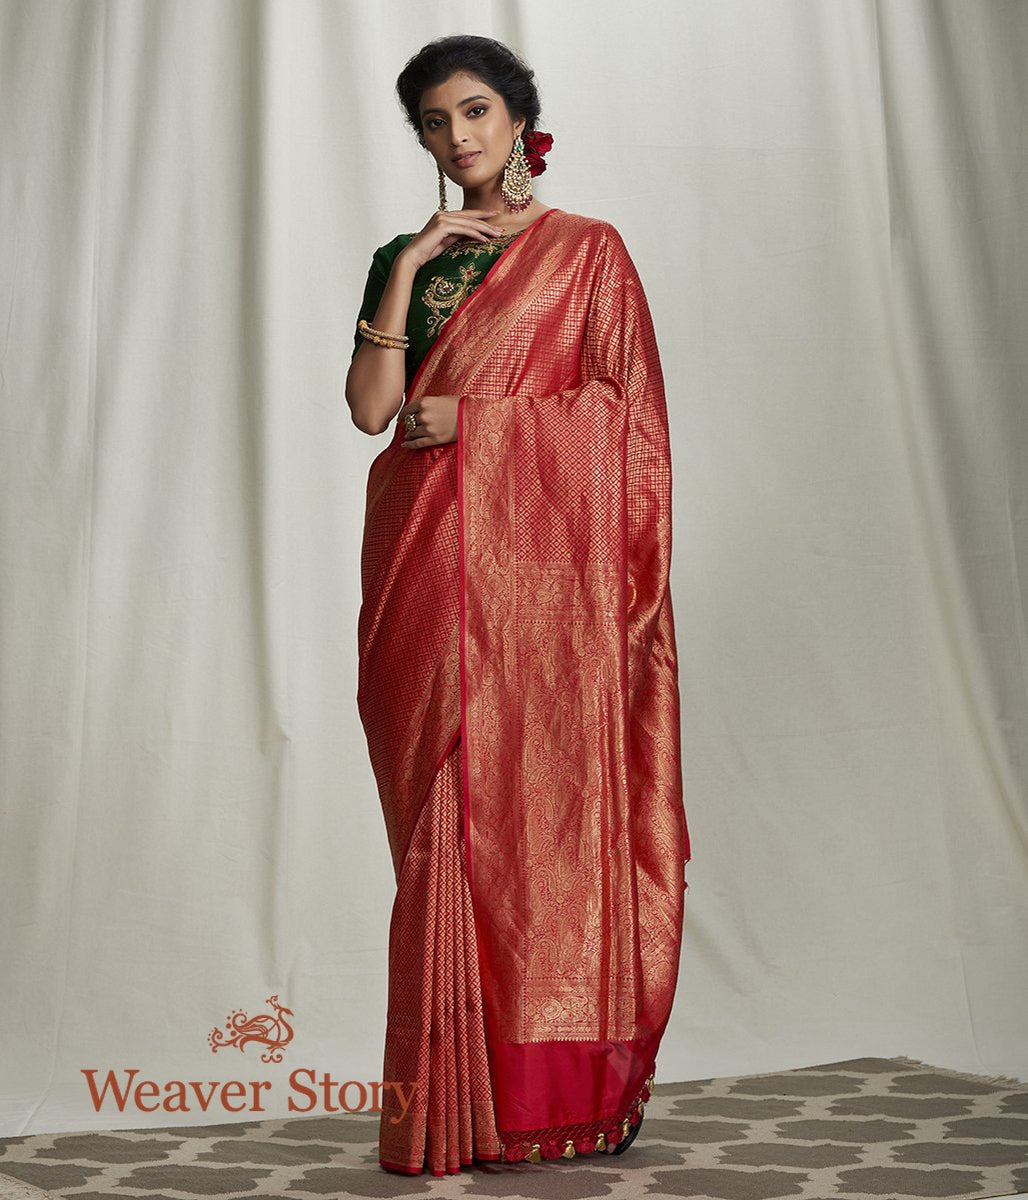 Handwoven_Red_Zari_Tanchoi_Saree_with_Small_Booti_WeaverStory_02